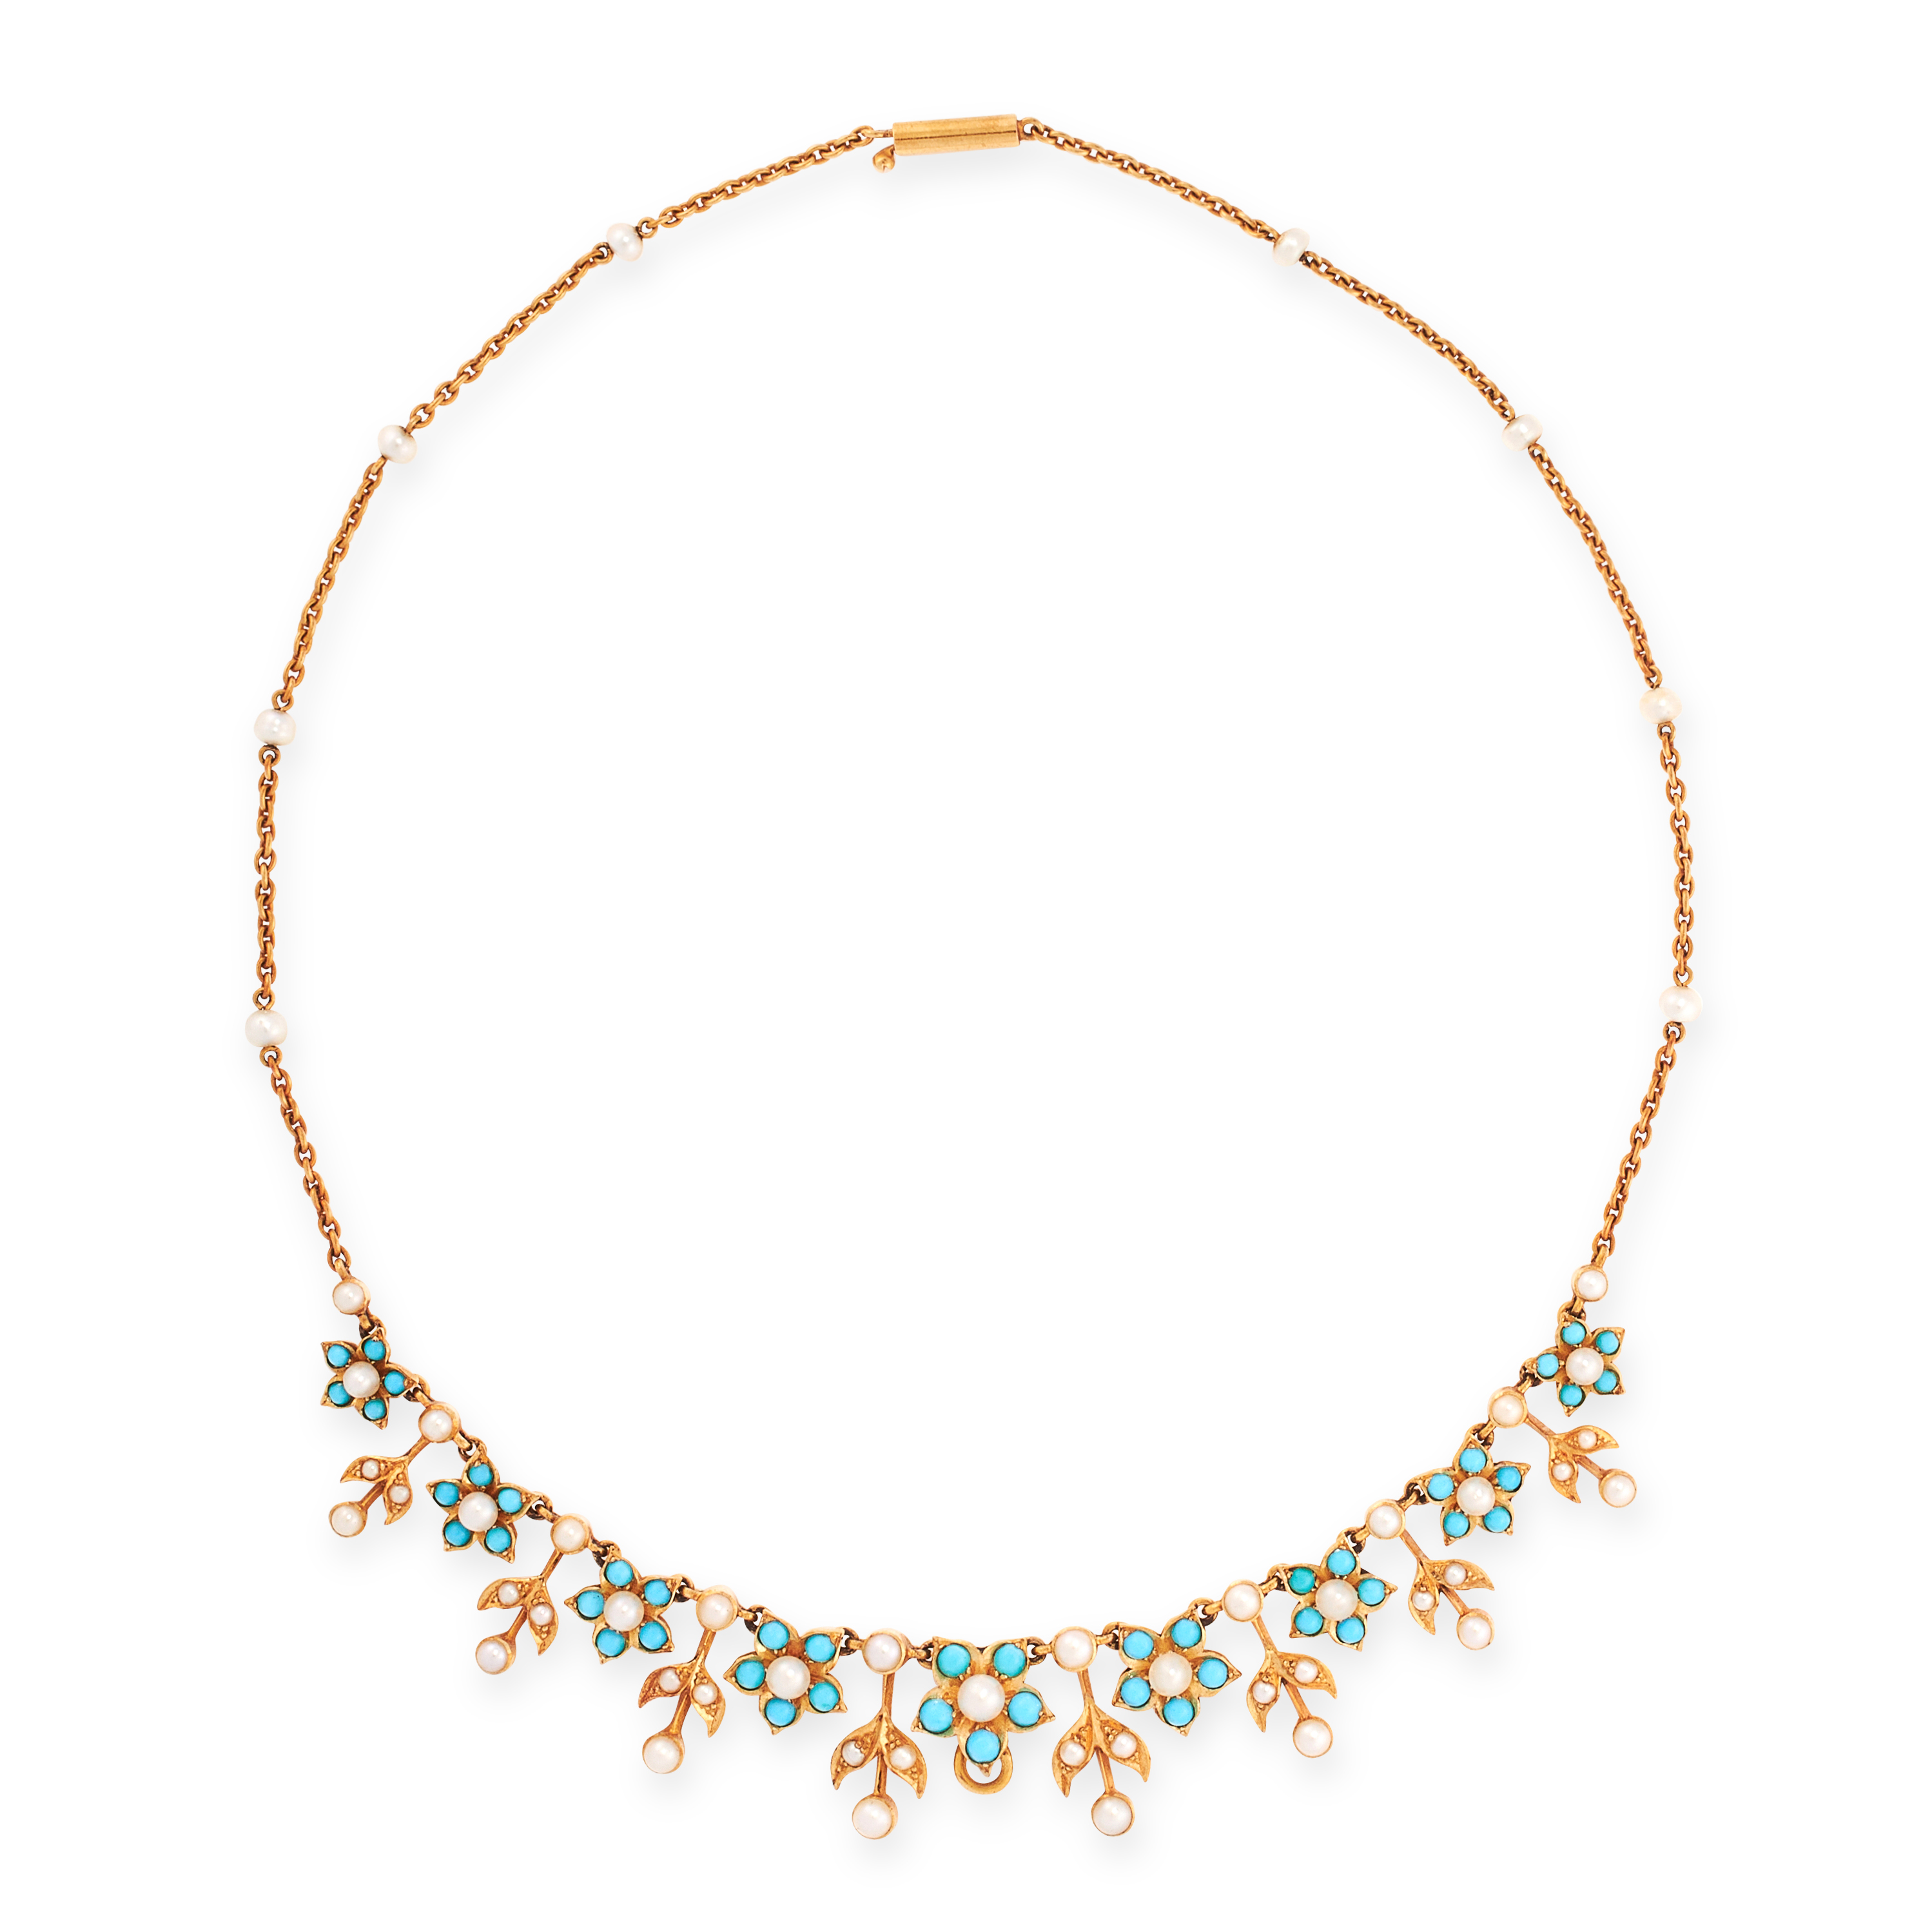 AN ANTIQUE TURQUOISE AND PEARL NECKLACE, 19TH CENTURY in yellow gold, formed of a series of flower